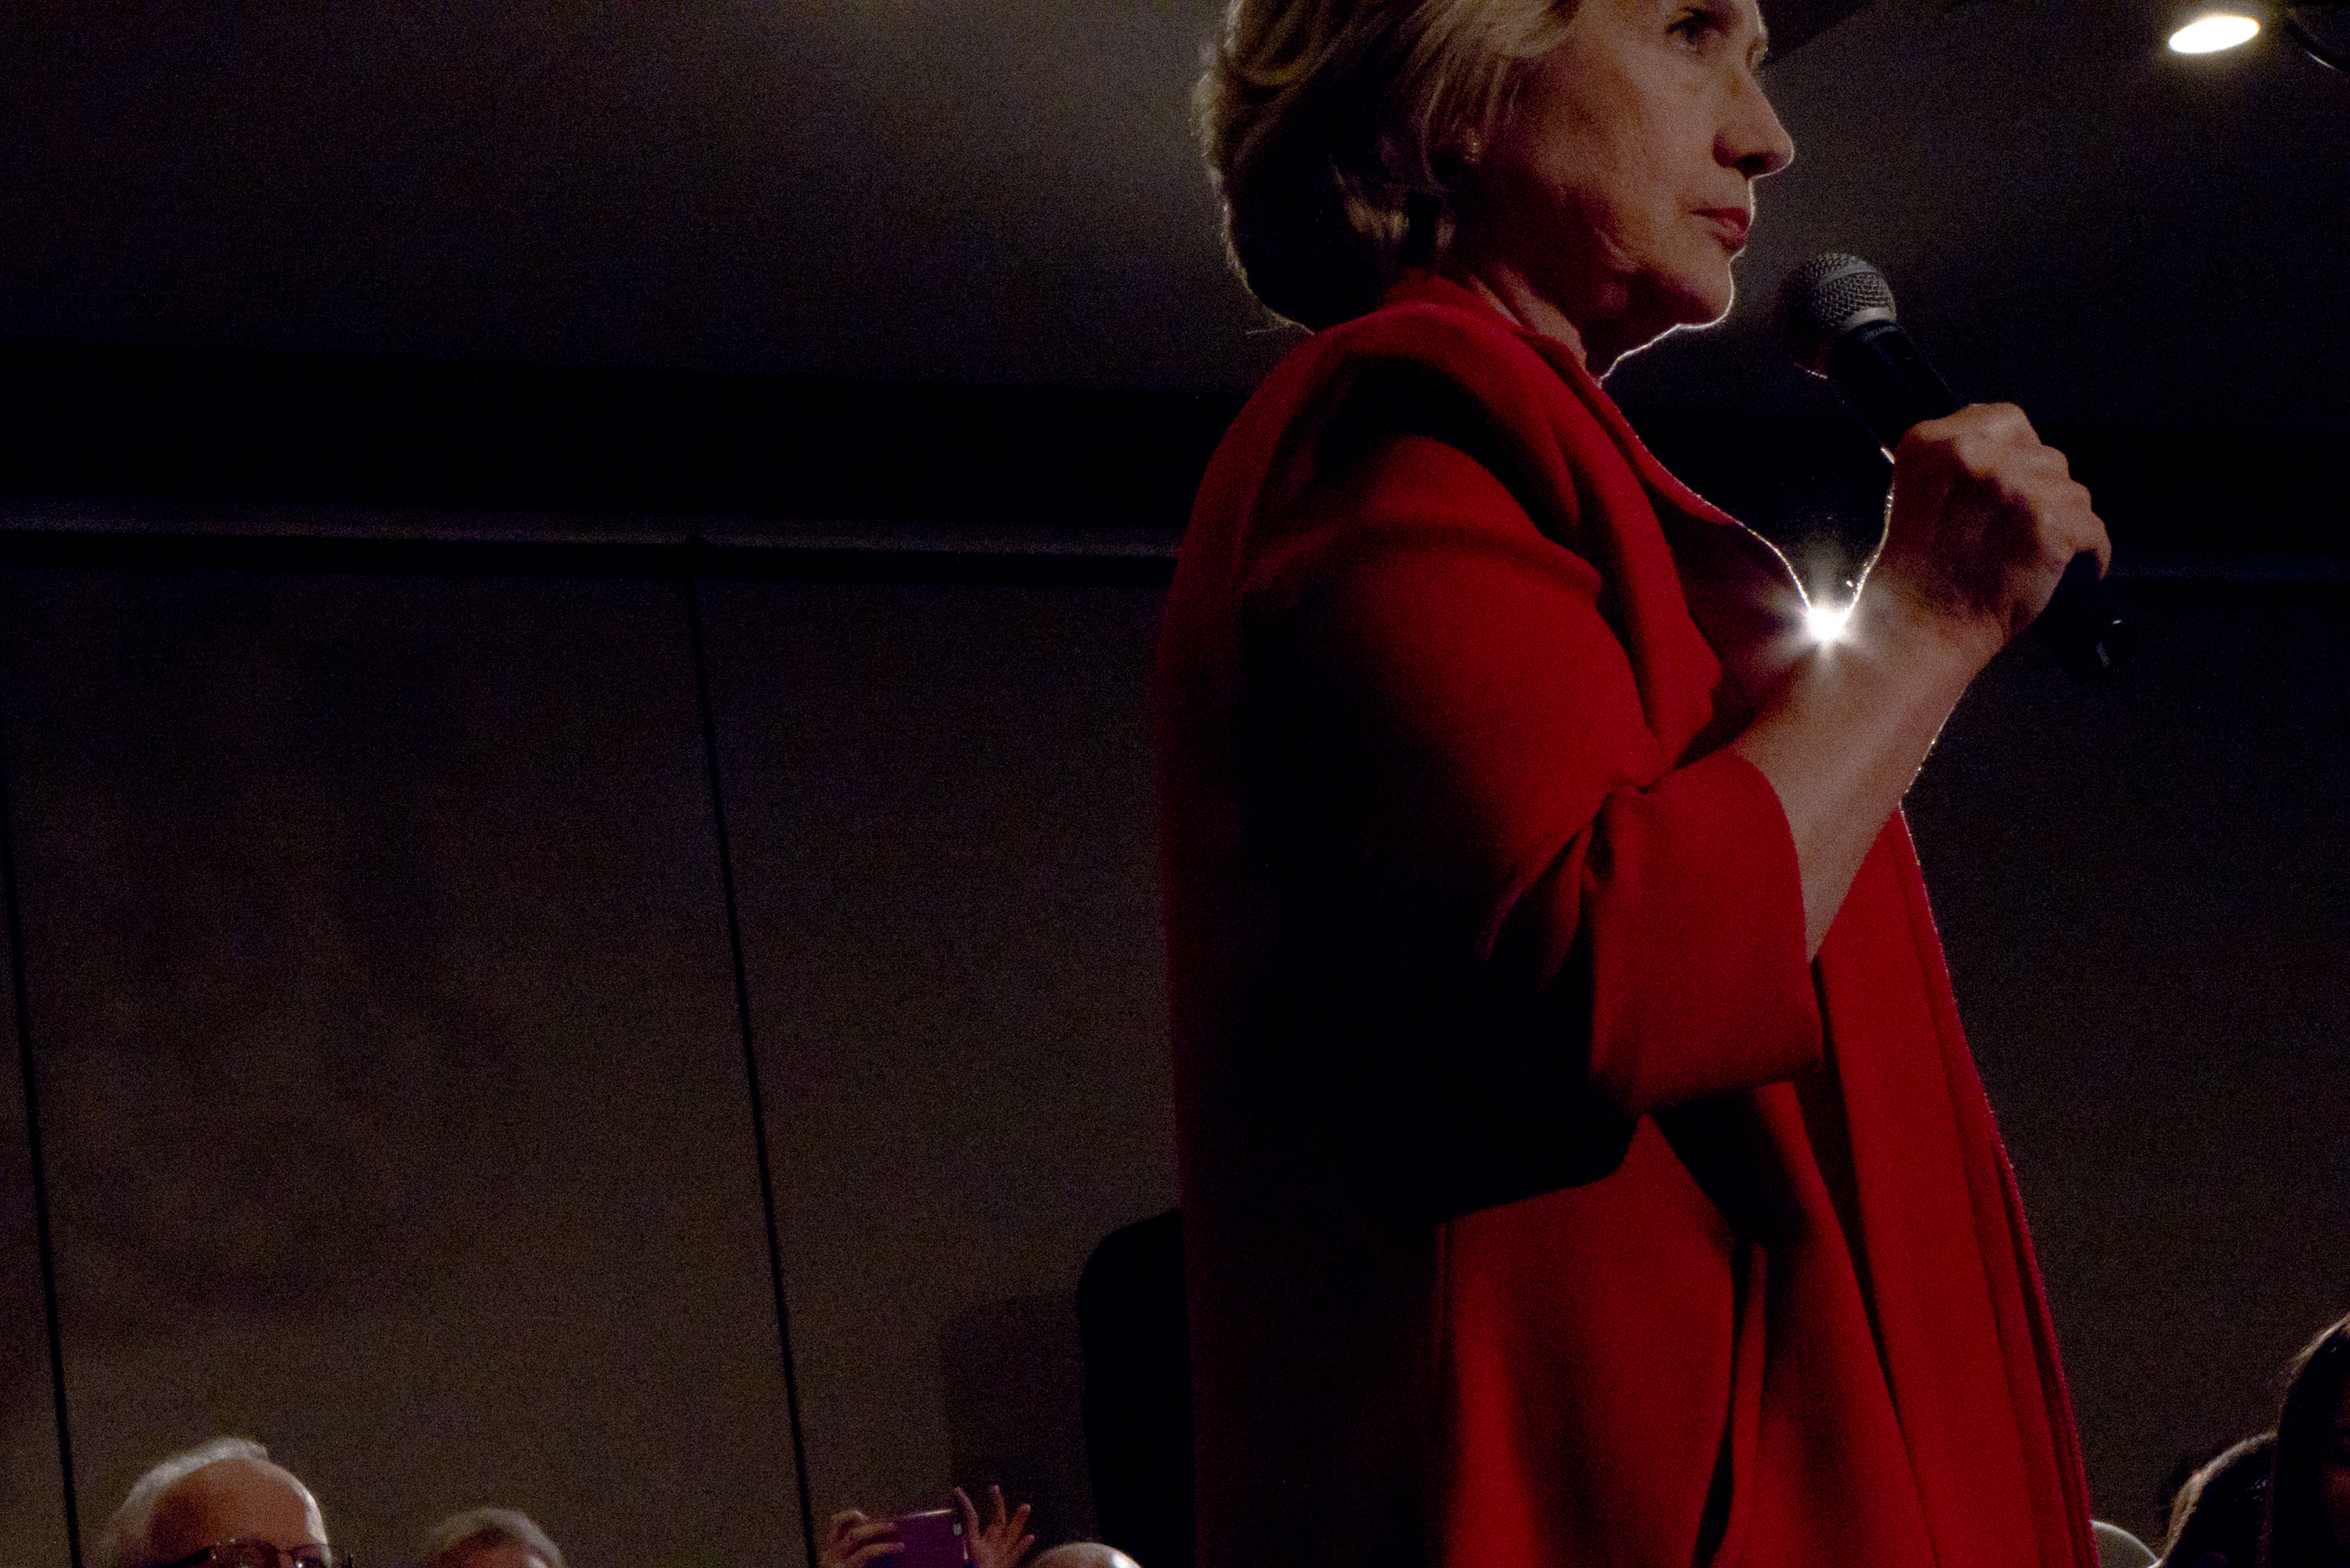 Hillary Clinton at a rally in Manchester, NH 2015.